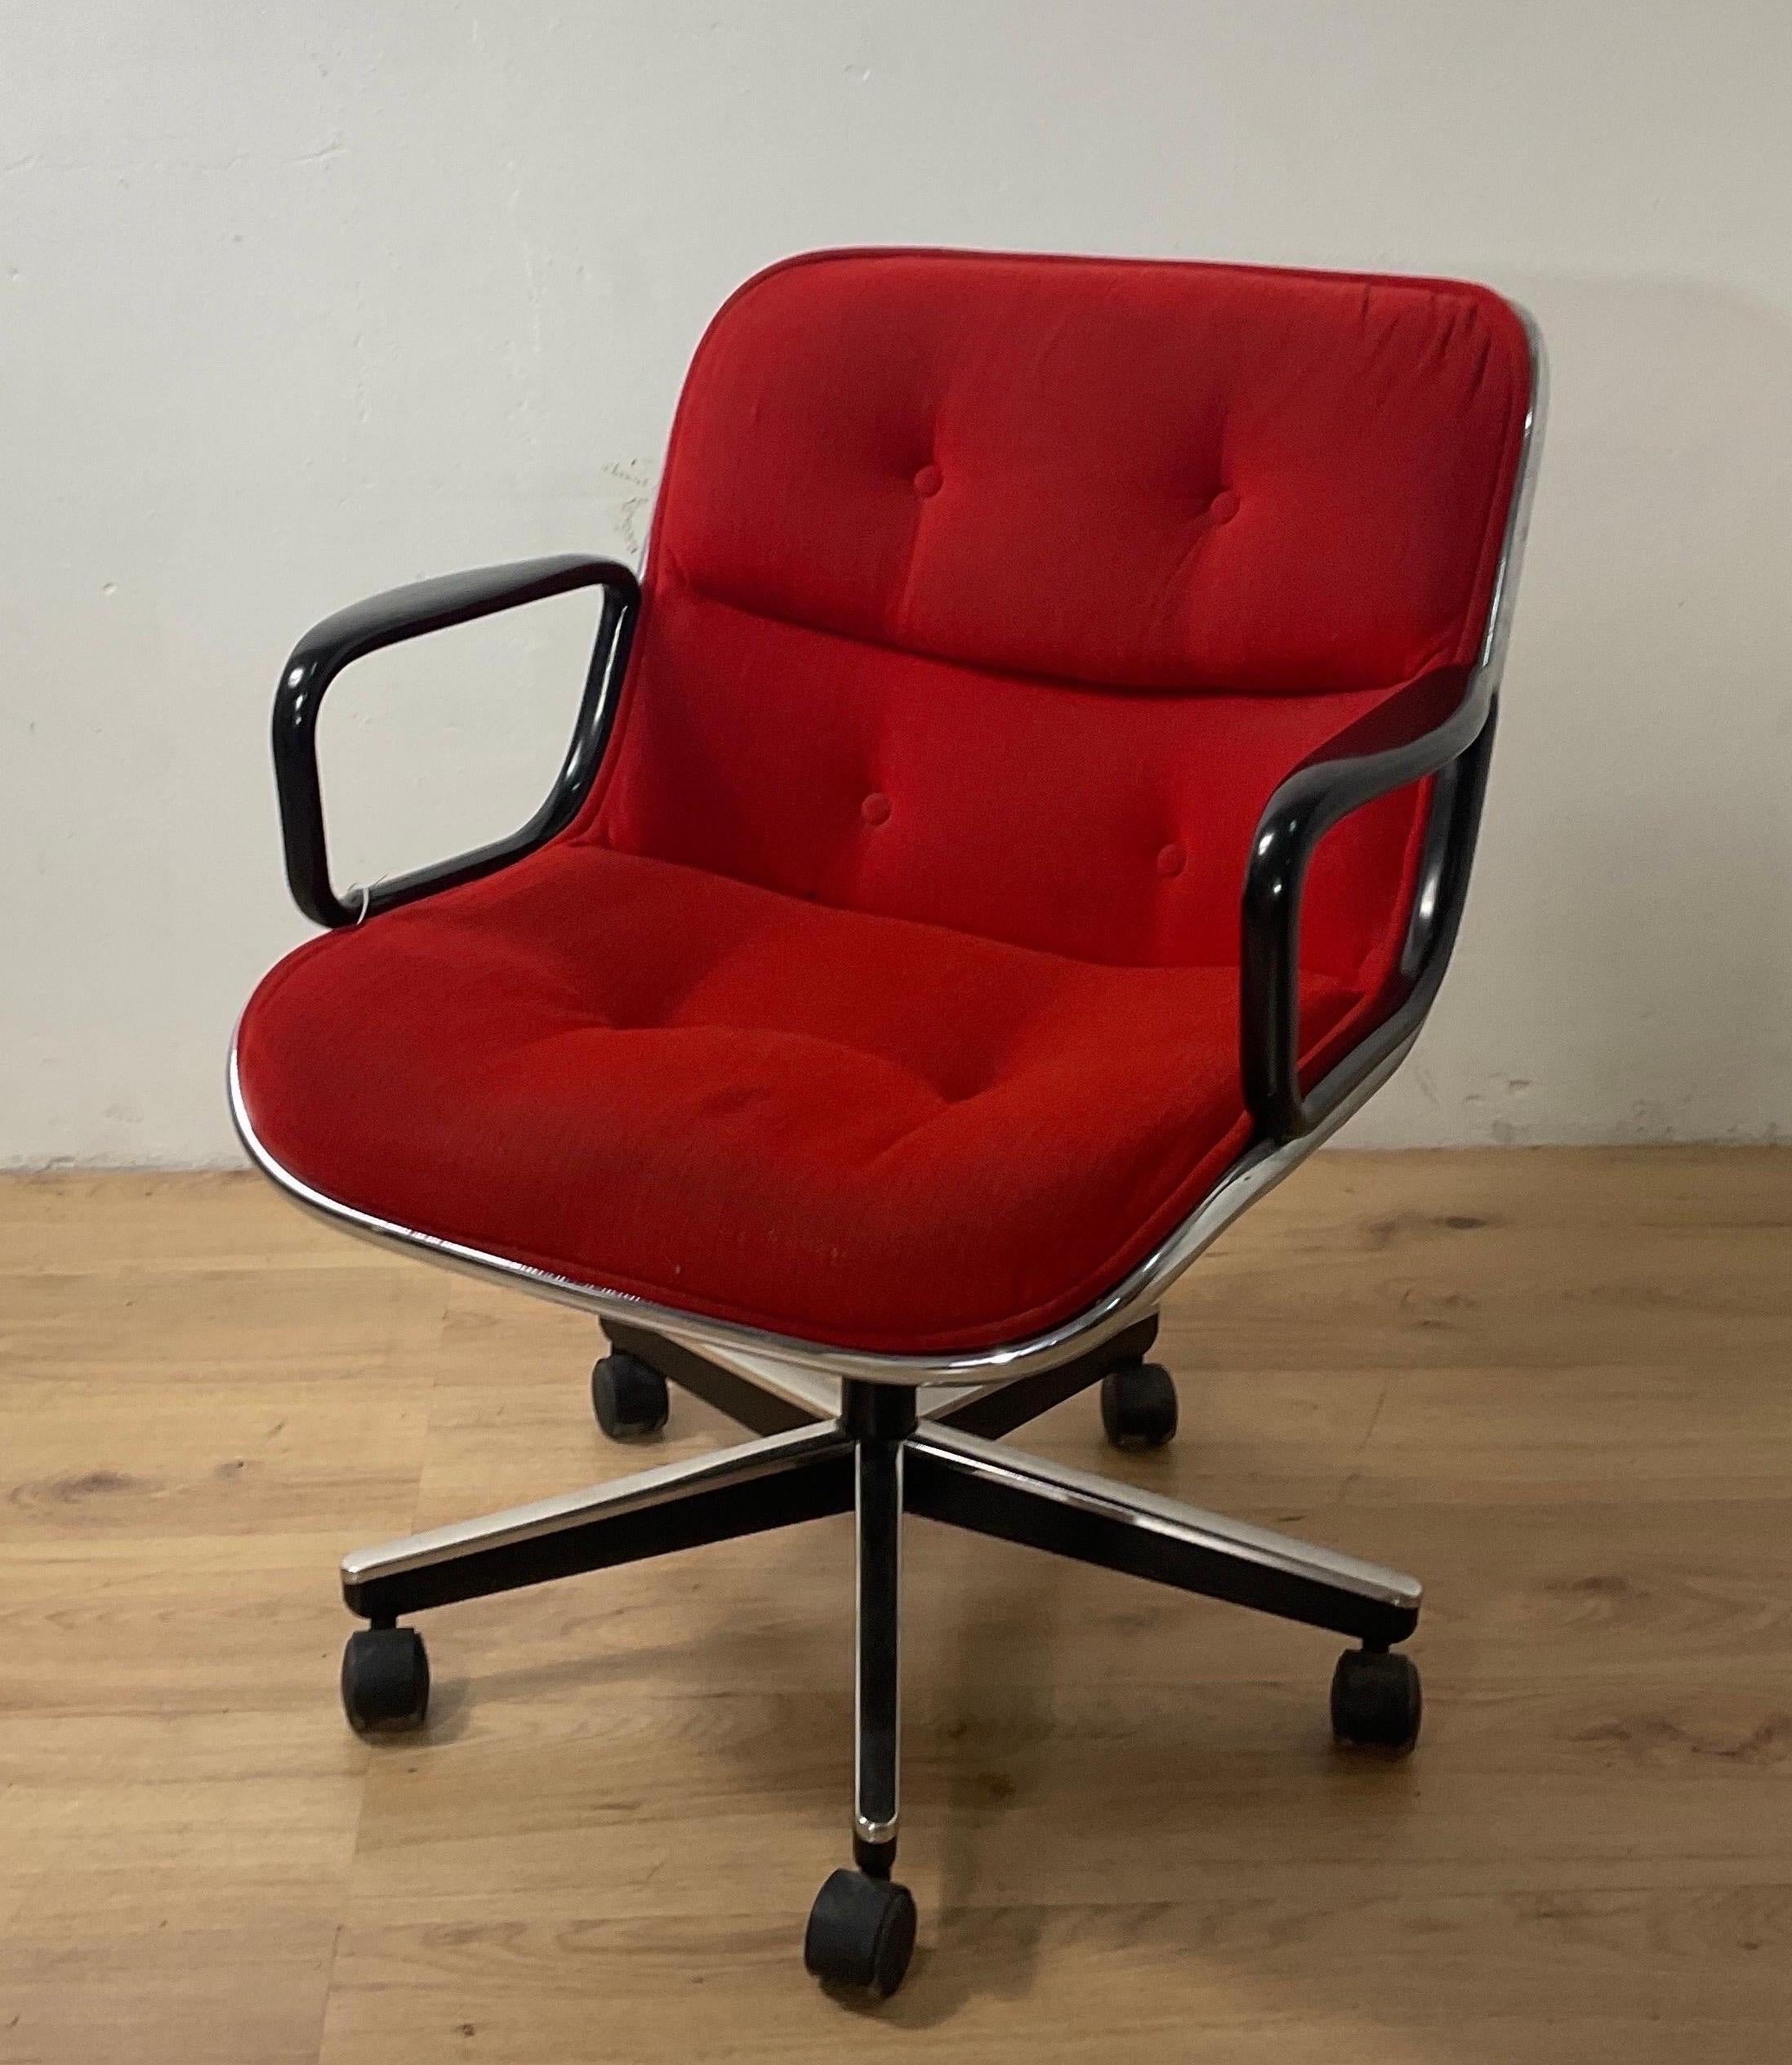 Saint Pierre and Miquelon Charles Pollock Executive Chair for Knoll, 1963 For Sale